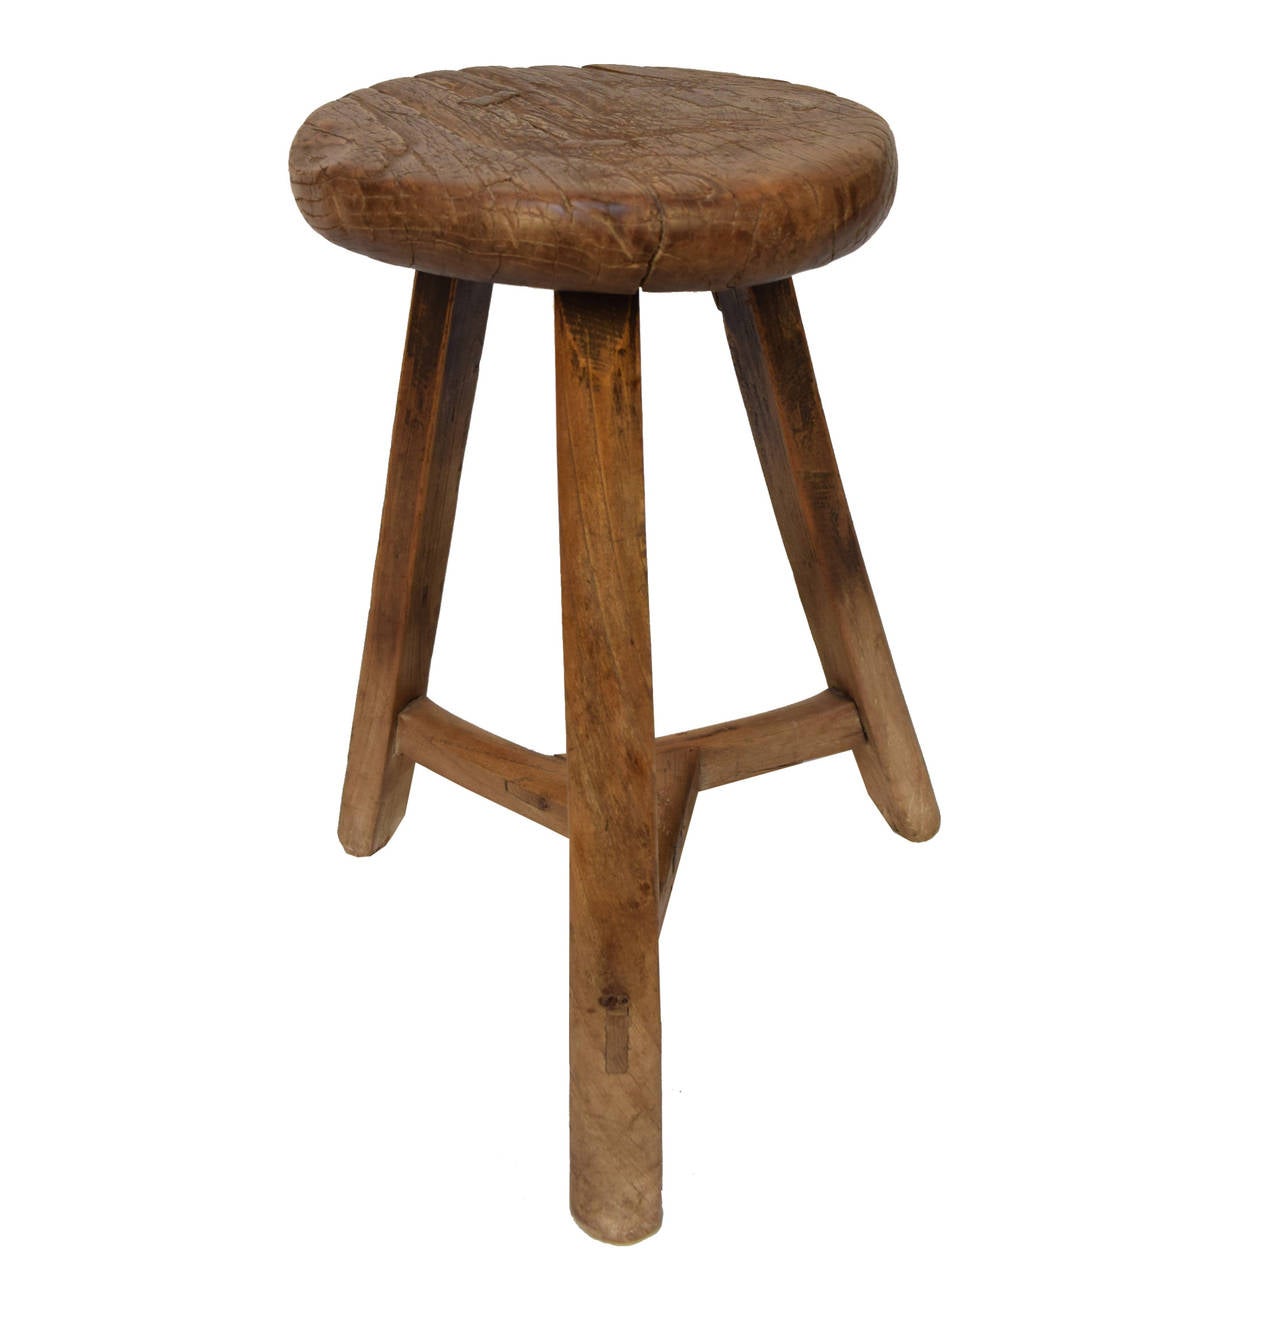 A round top stool from Northern China made of Chinese Northern Elm from, circa 1850 with three legs.